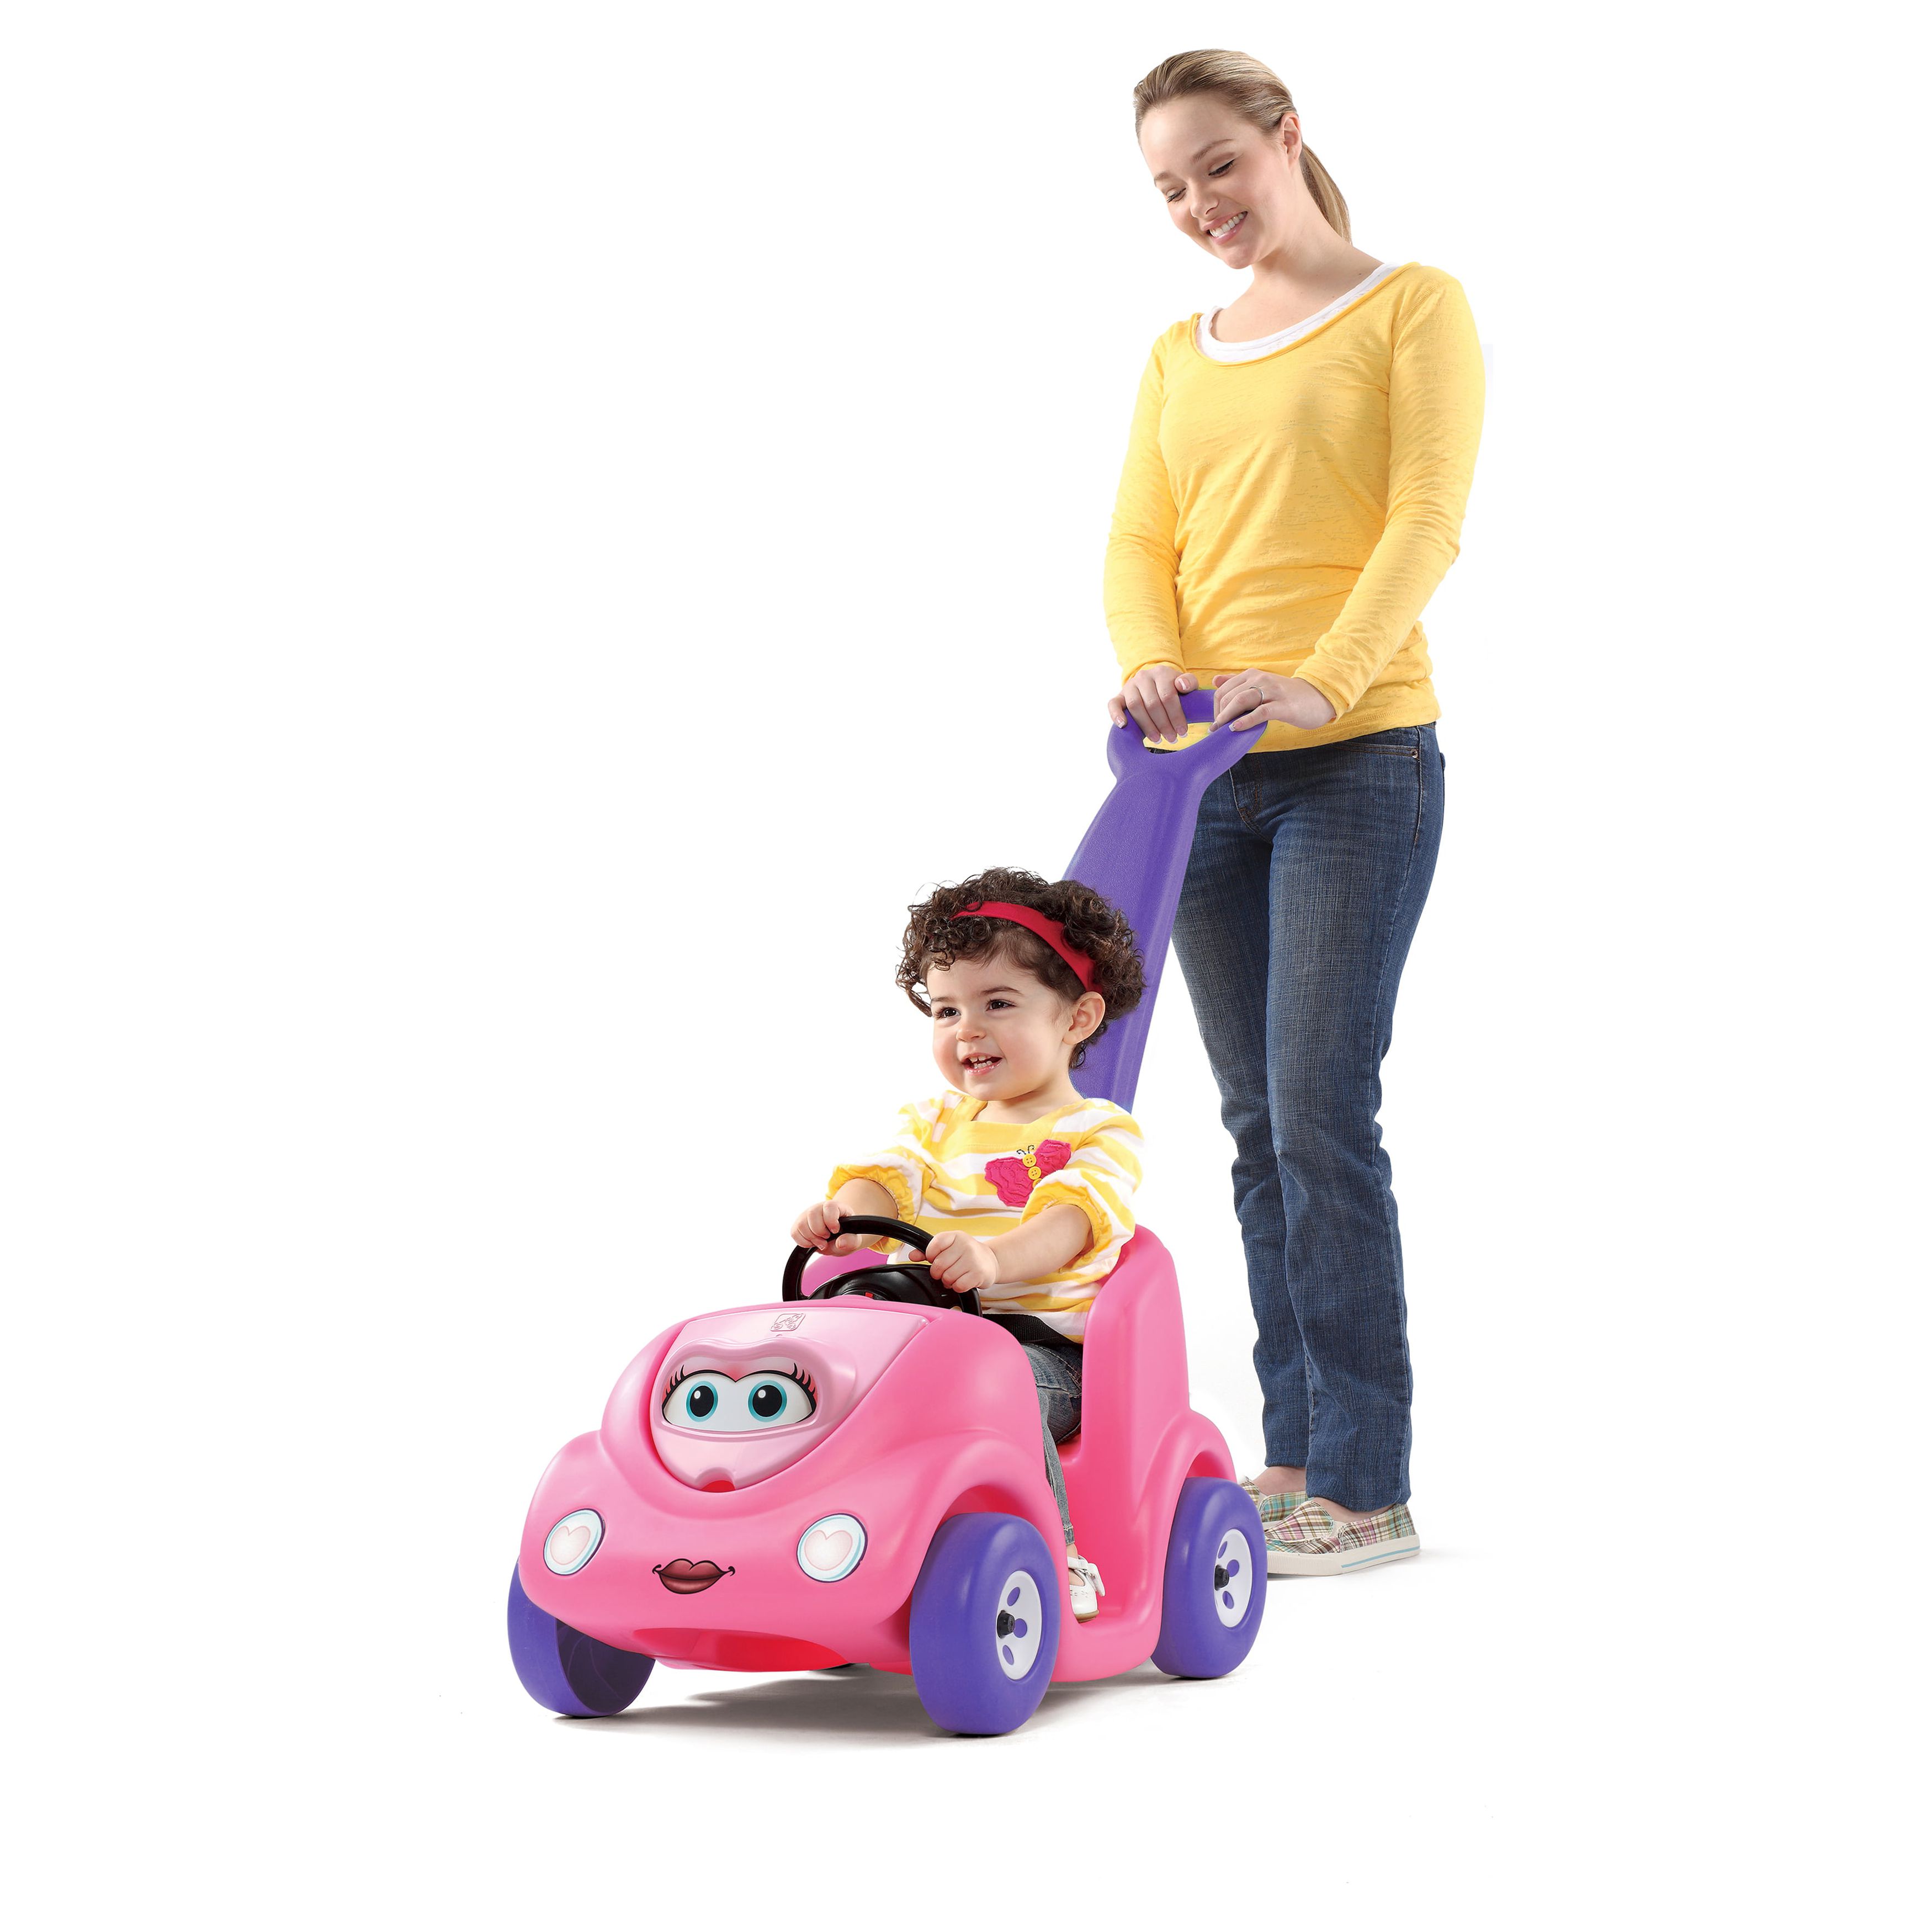 Step2 Push Around Buggy Pink 10th Anniversary Edition Kids Push Car and Ride On Toy for Toddler - image 4 of 9